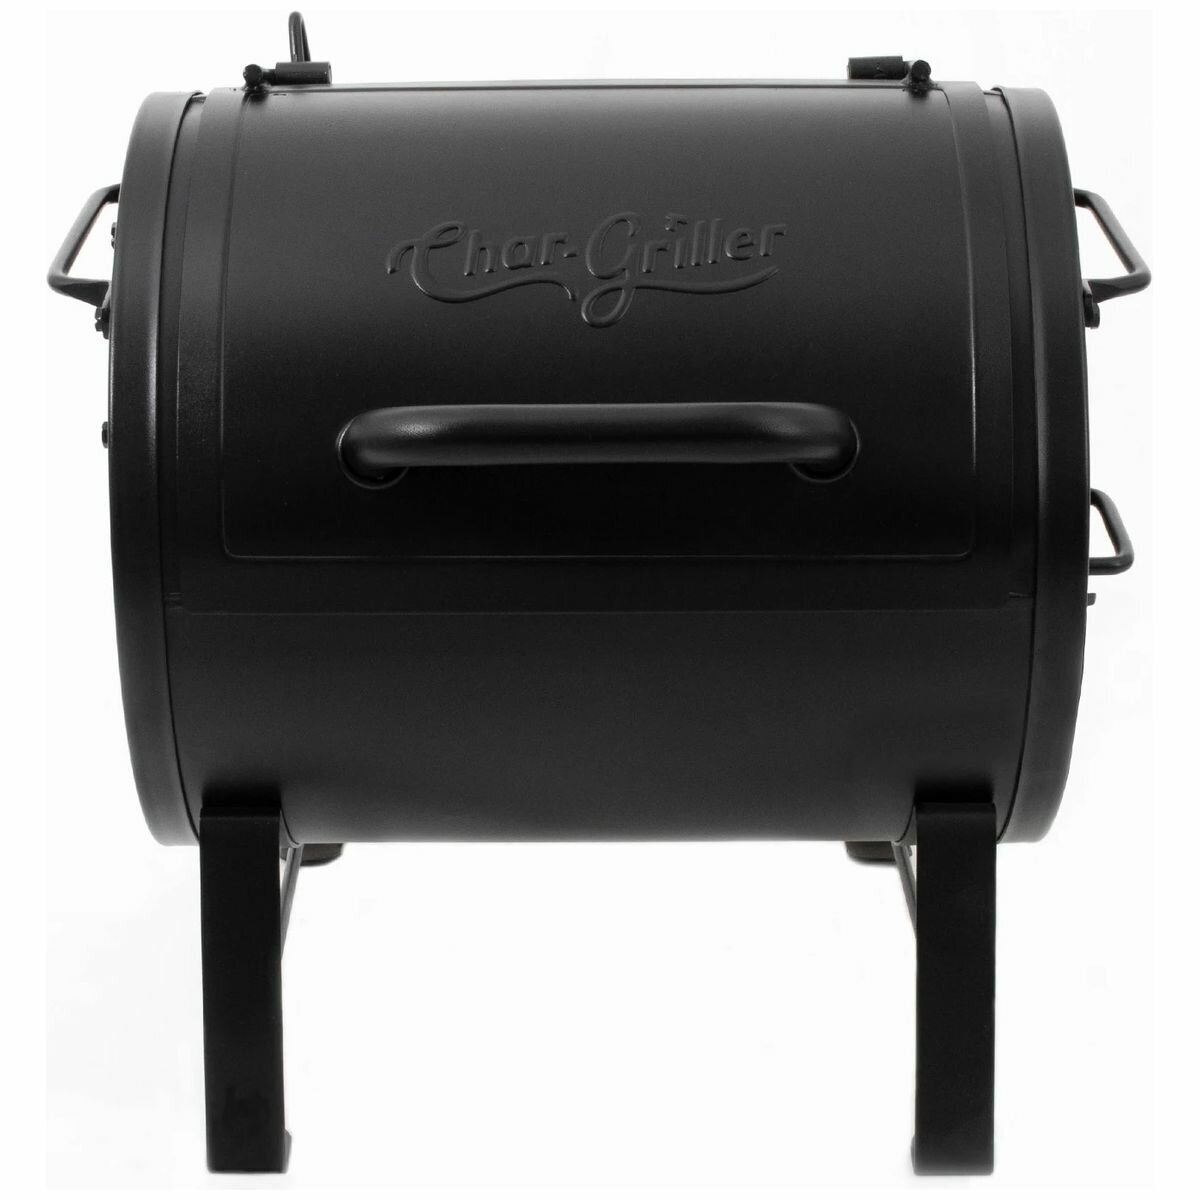 Char-Griller Grand Champ Charcoal Grill and Offset Smoker in Black